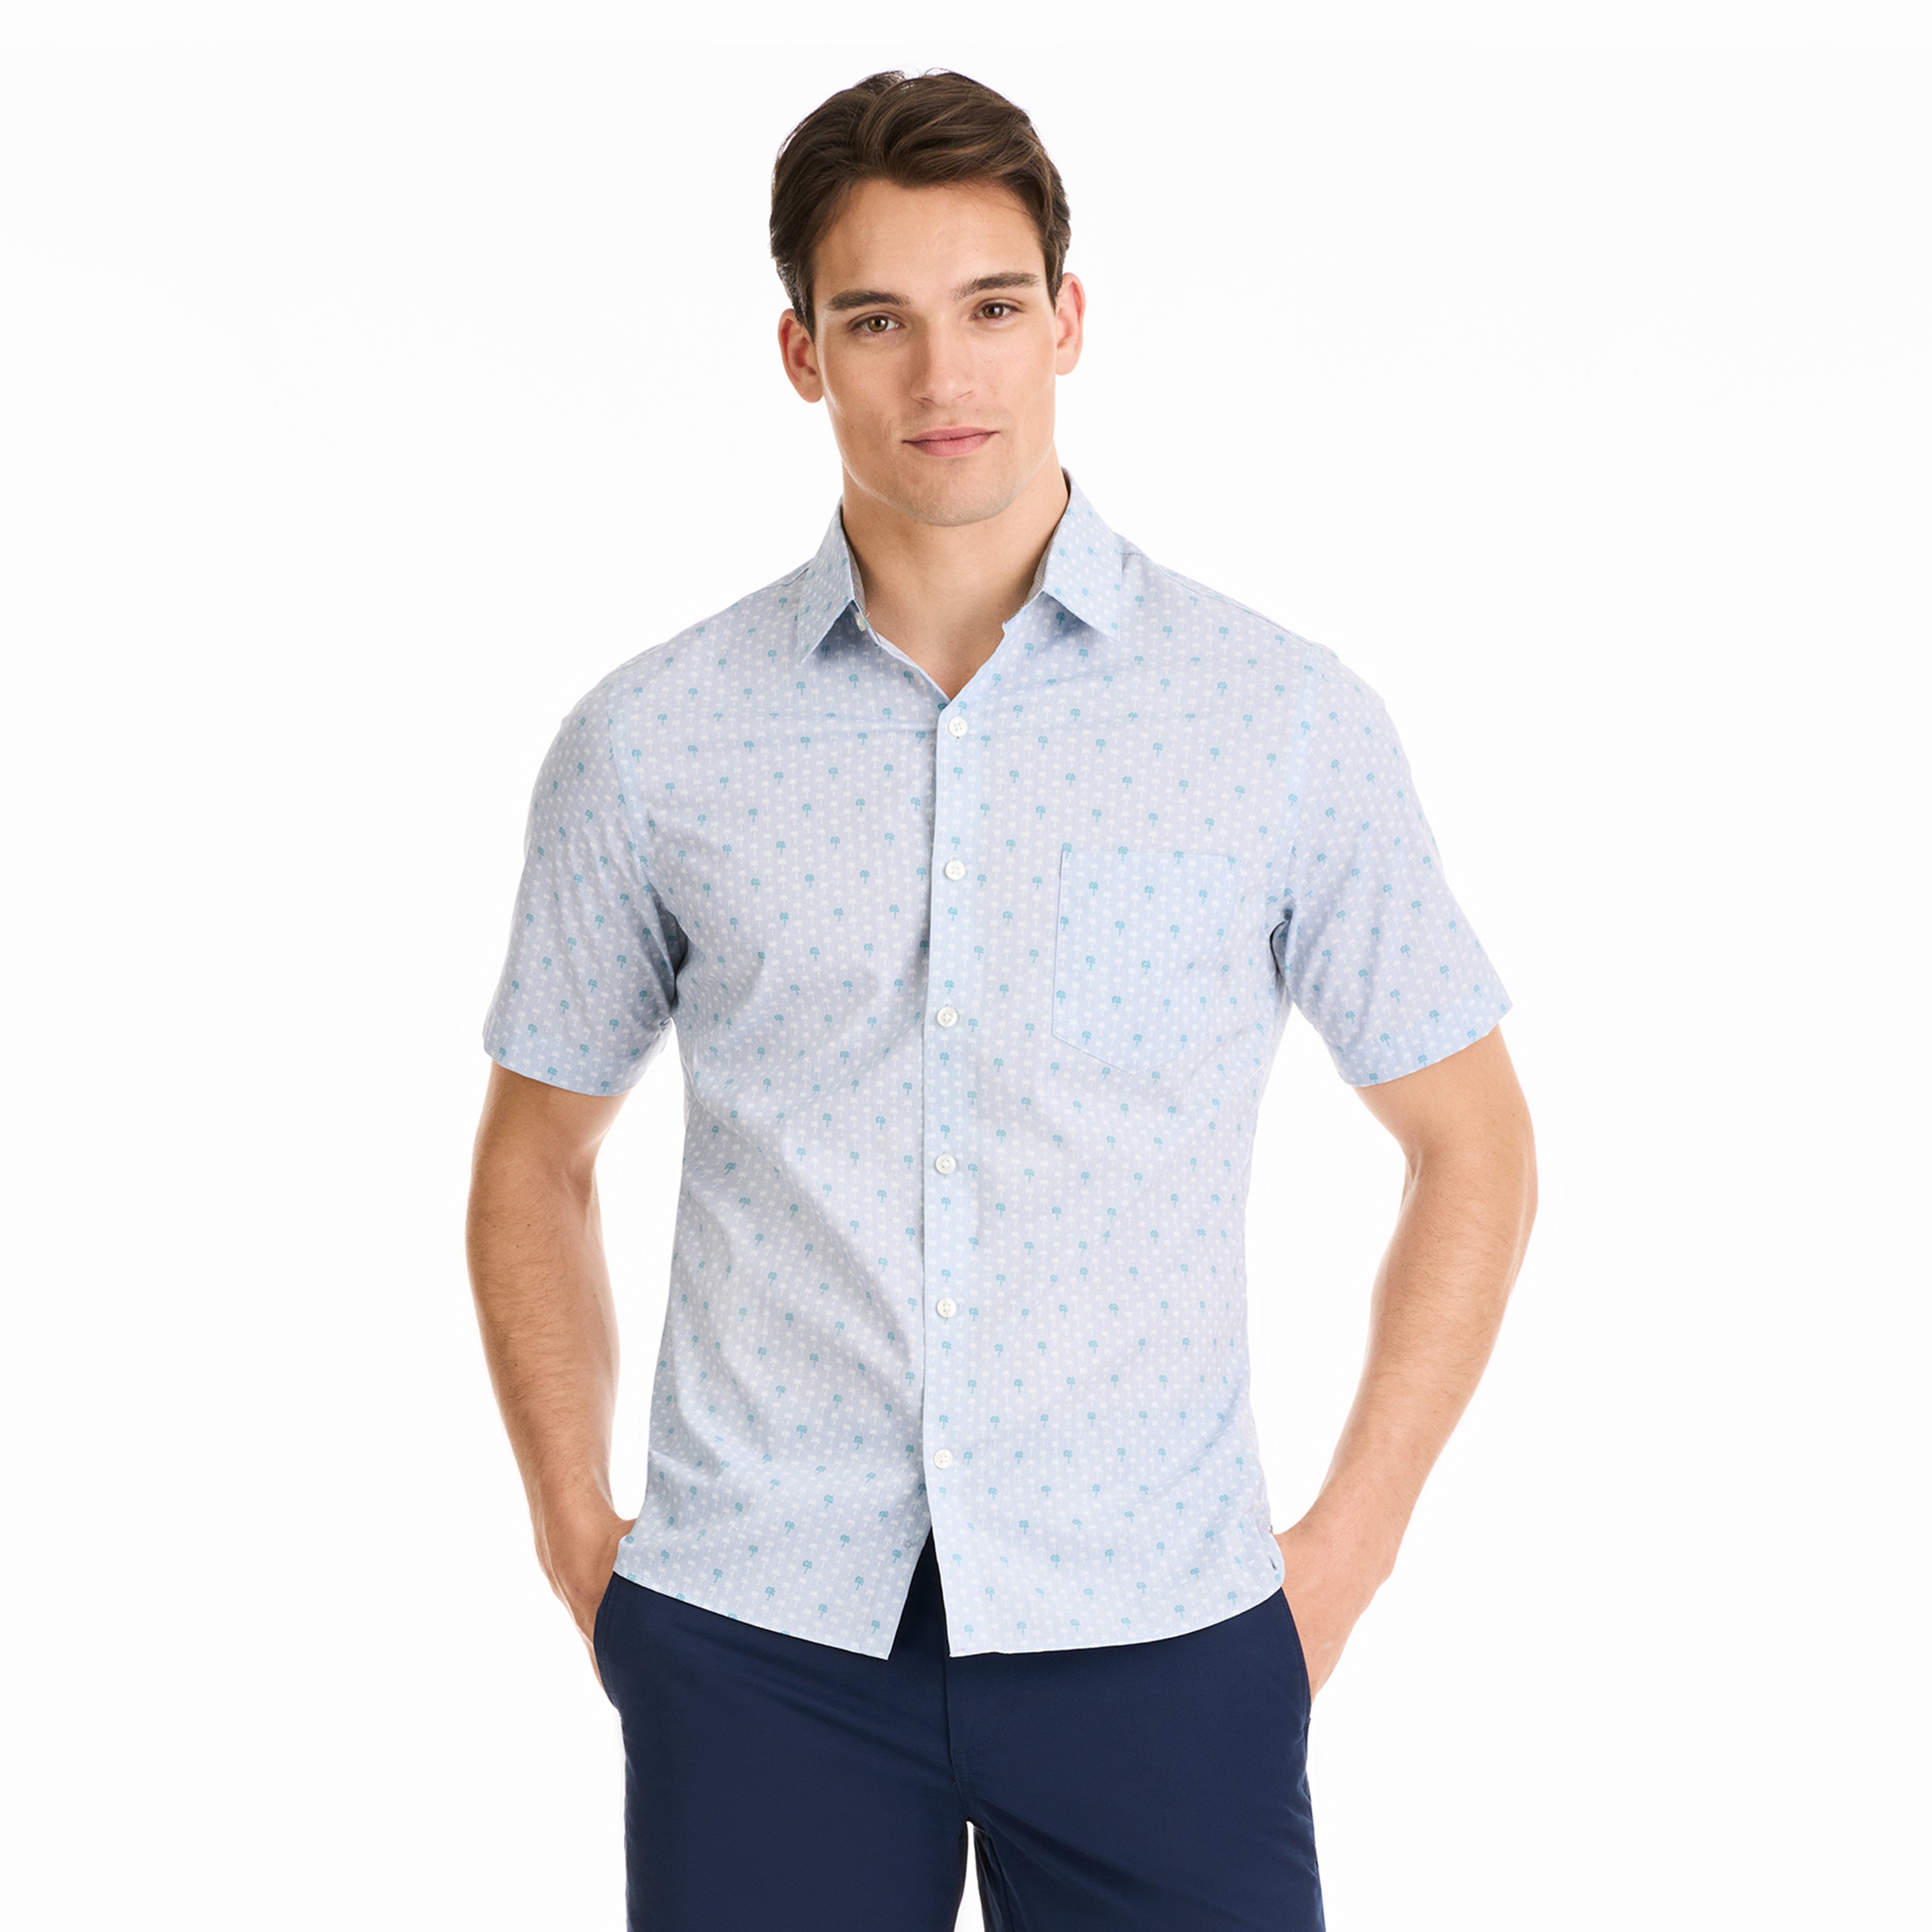 Essential Stain Shield Palm Woven Short Sleeve Shirt - Slim Fit